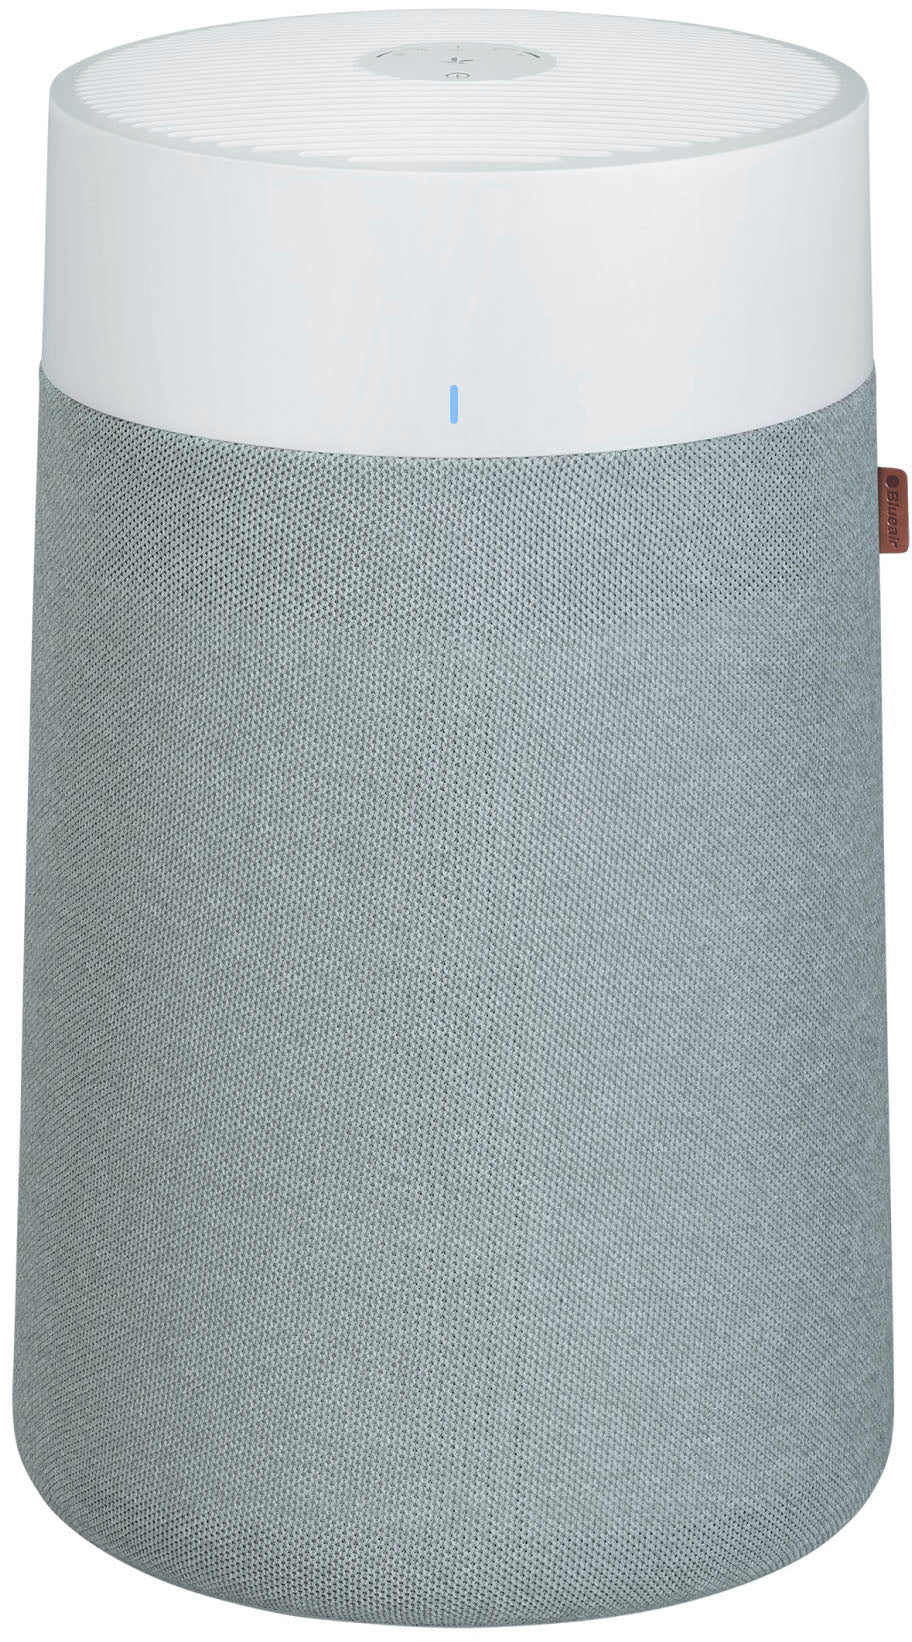 Blueair - Blue Pure 411i Max 219 Sq. Ft HEPASilent Smart Small Room Bedroom Air Purifier - White/Gray_2